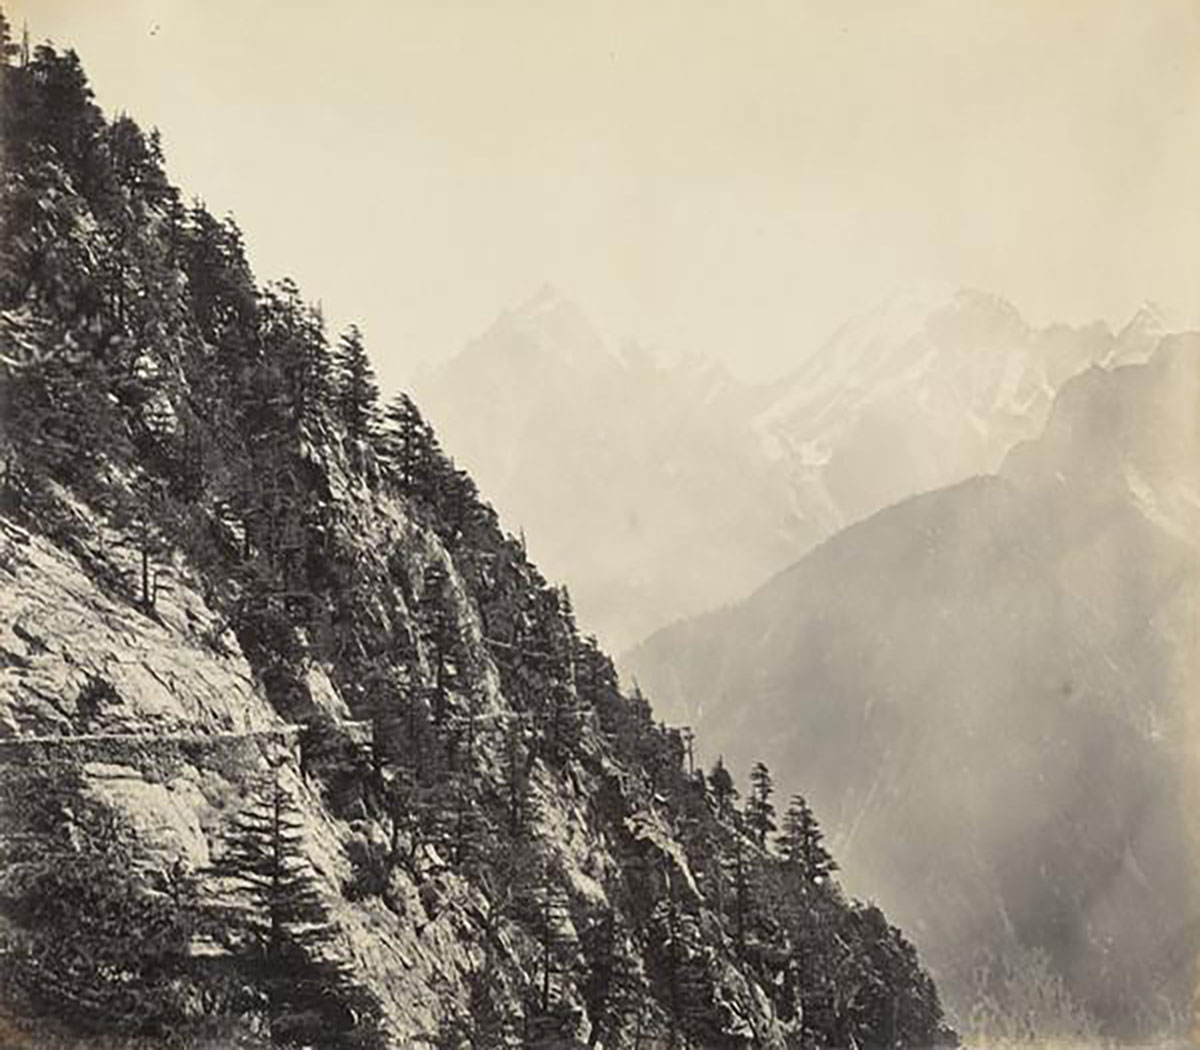 A sepia-toned view of a tree-laden mountainside in the Himalayas, with snow-capped peaks faintly visible in the background.